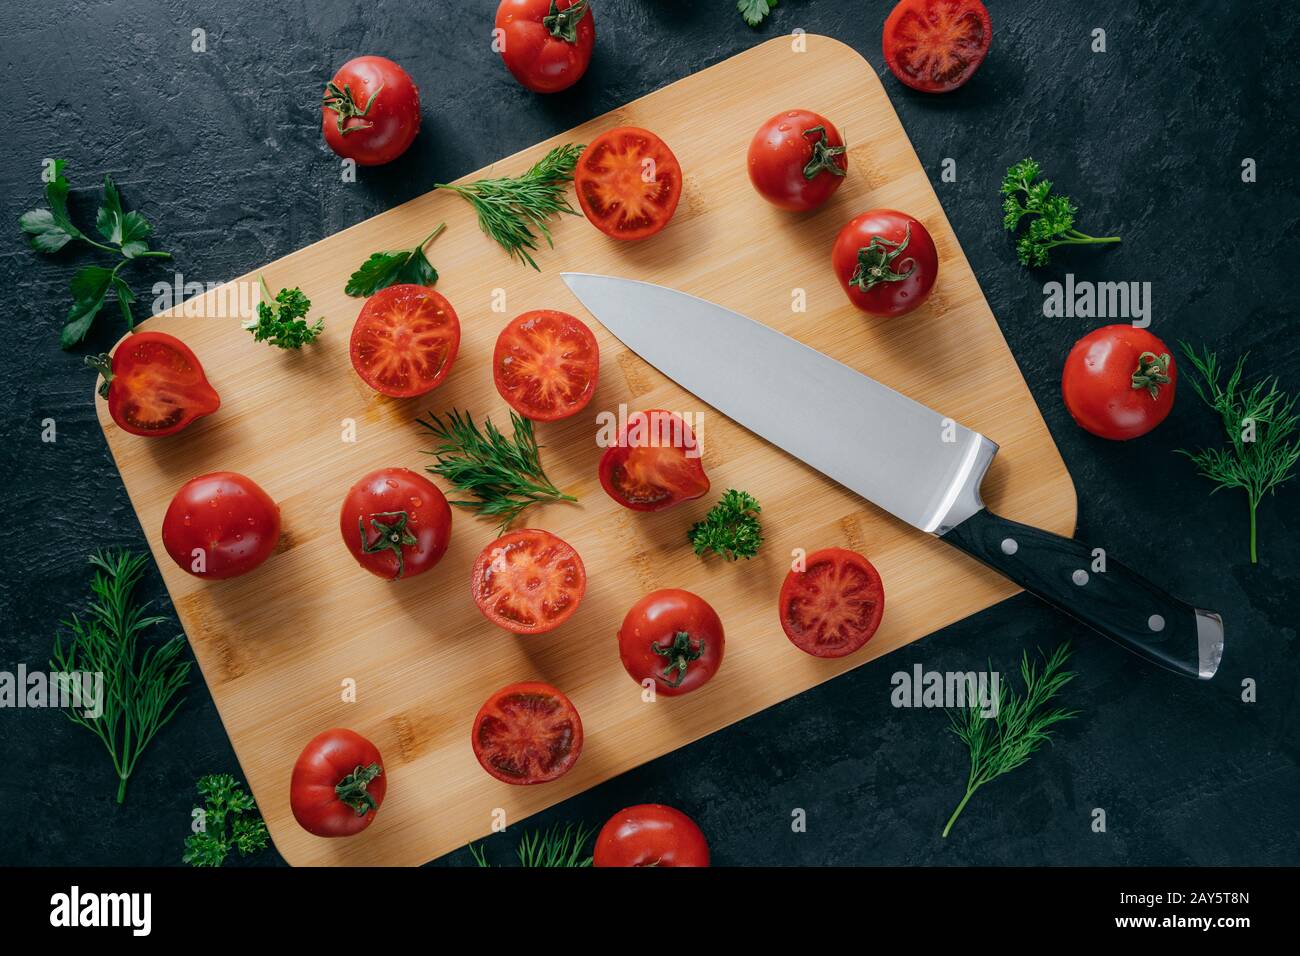 Top view of fresh small red tomatoes sliced on wooden kitchen board with knife. Green parsley and dill near. Vegetables and vitamins Stock Photo